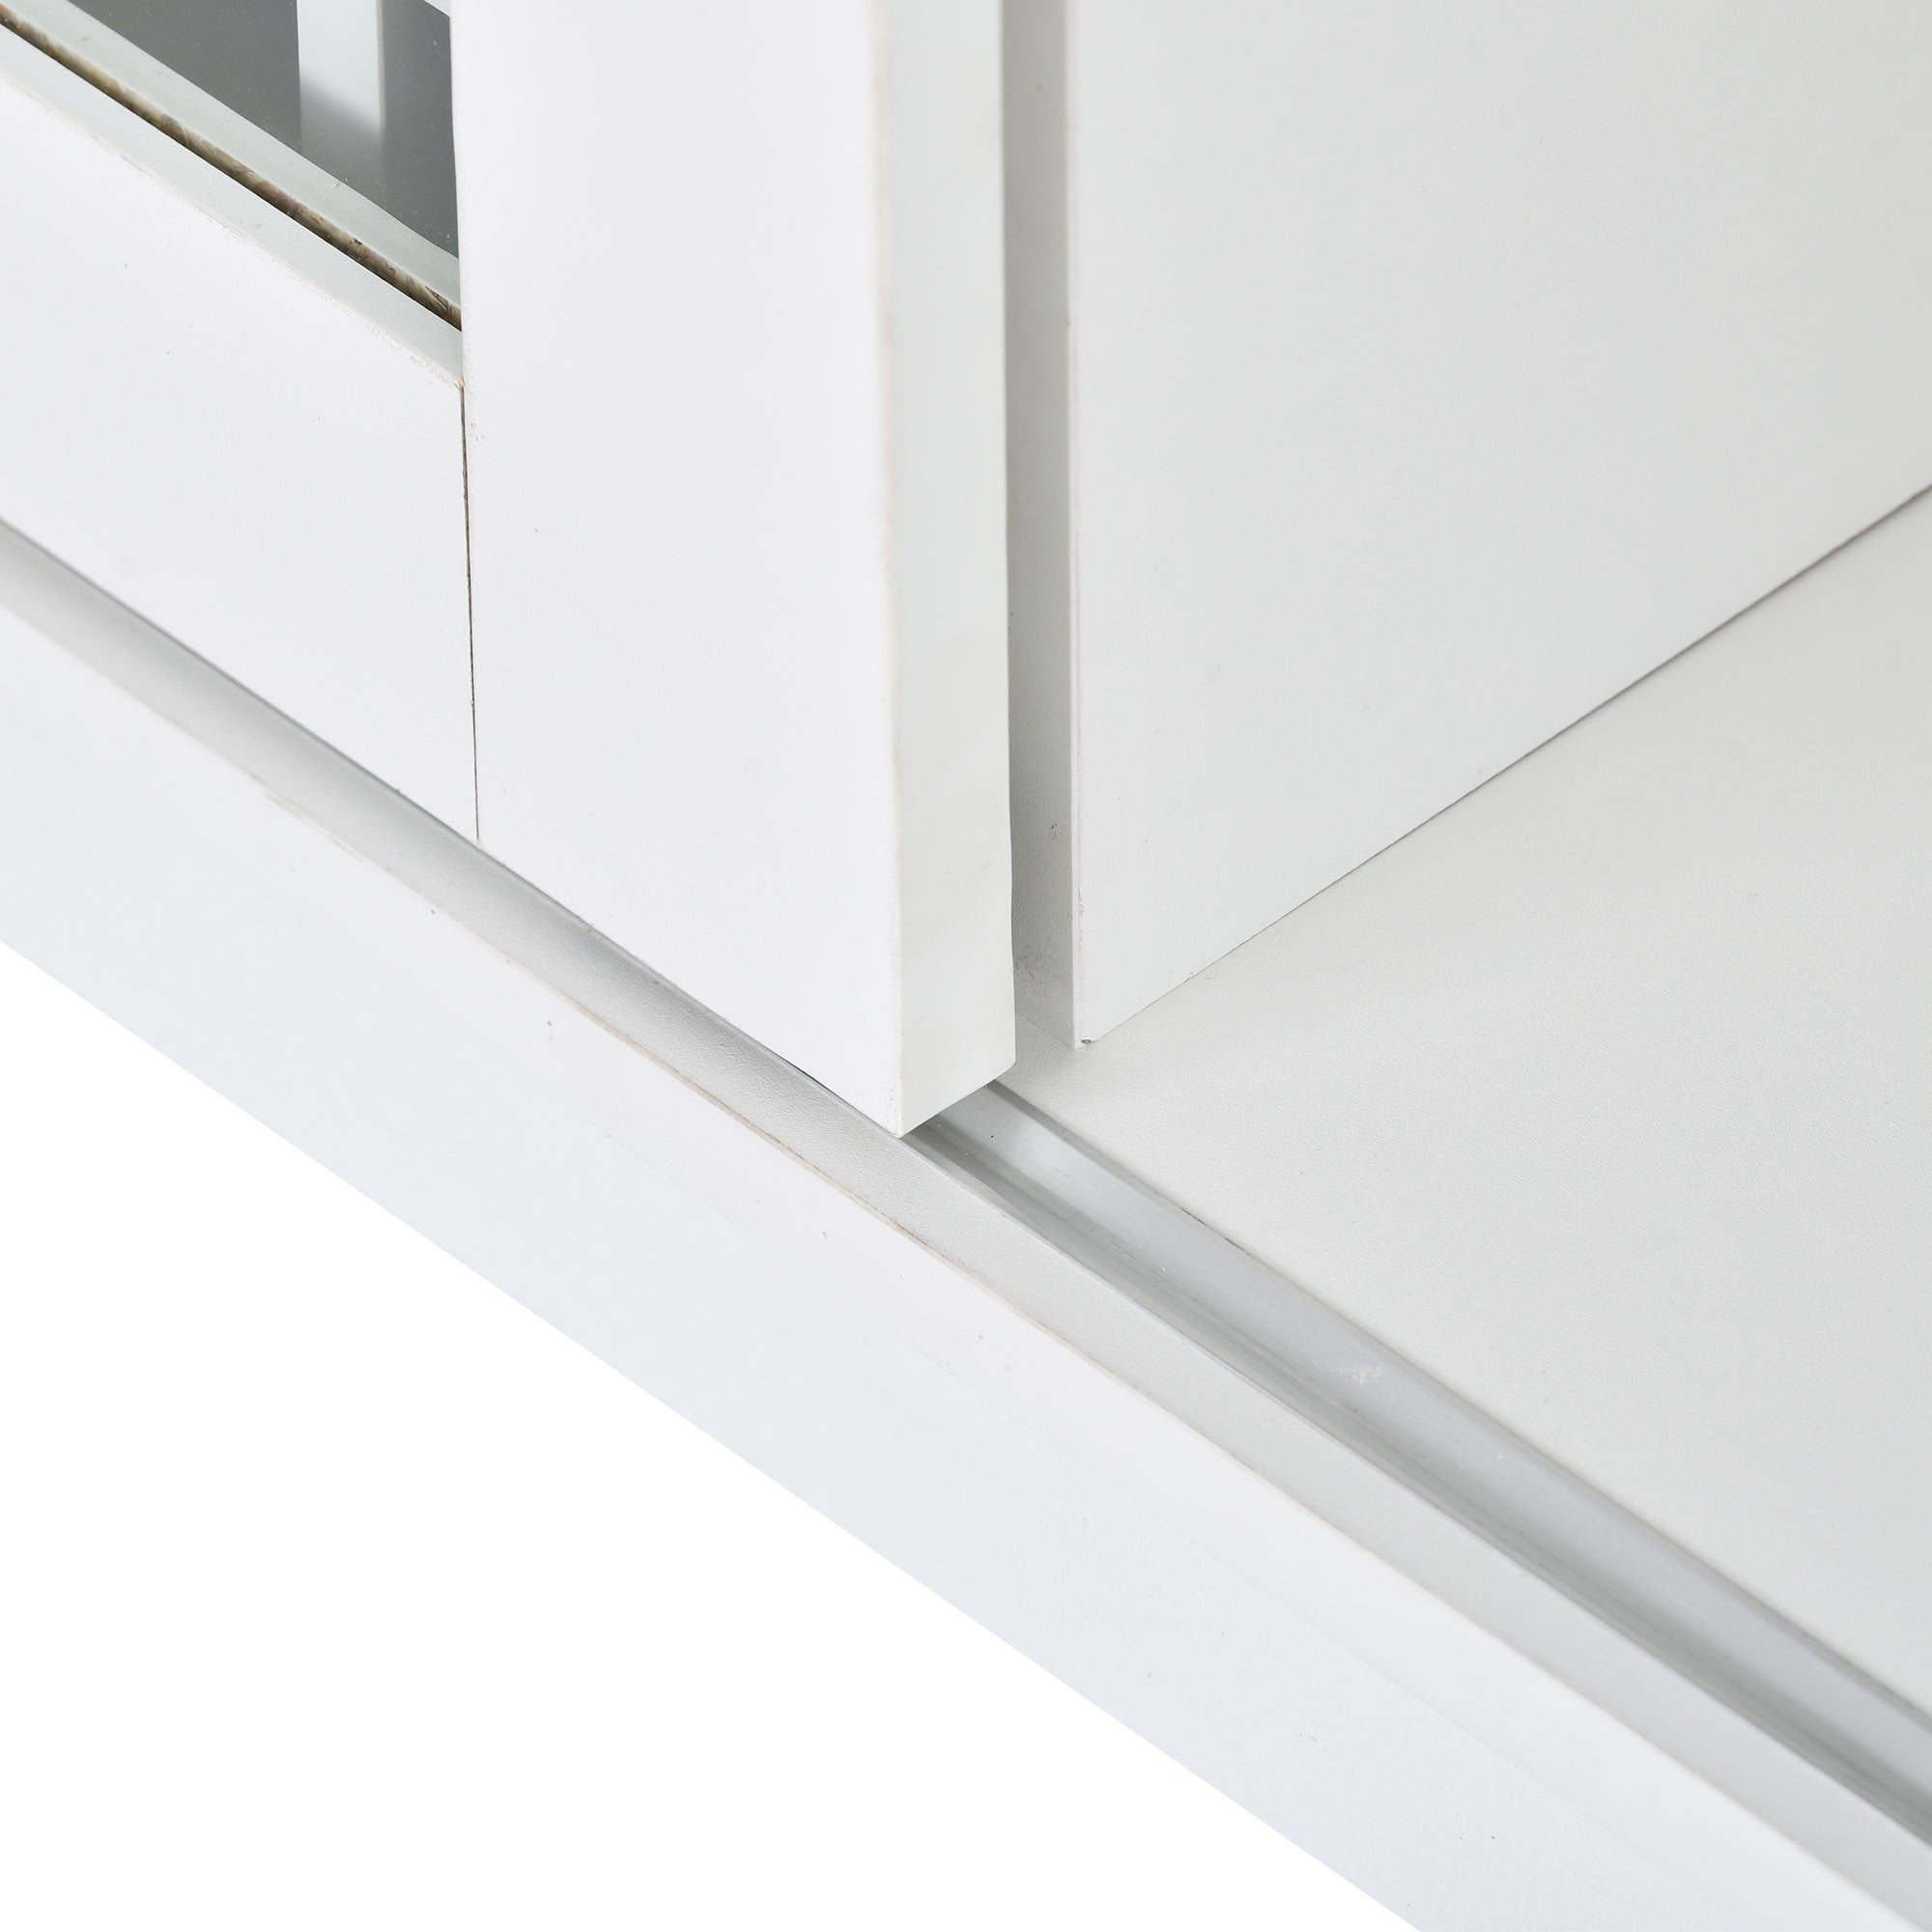 TREXM Glass Sliding Door and Integrated Compartment (White)